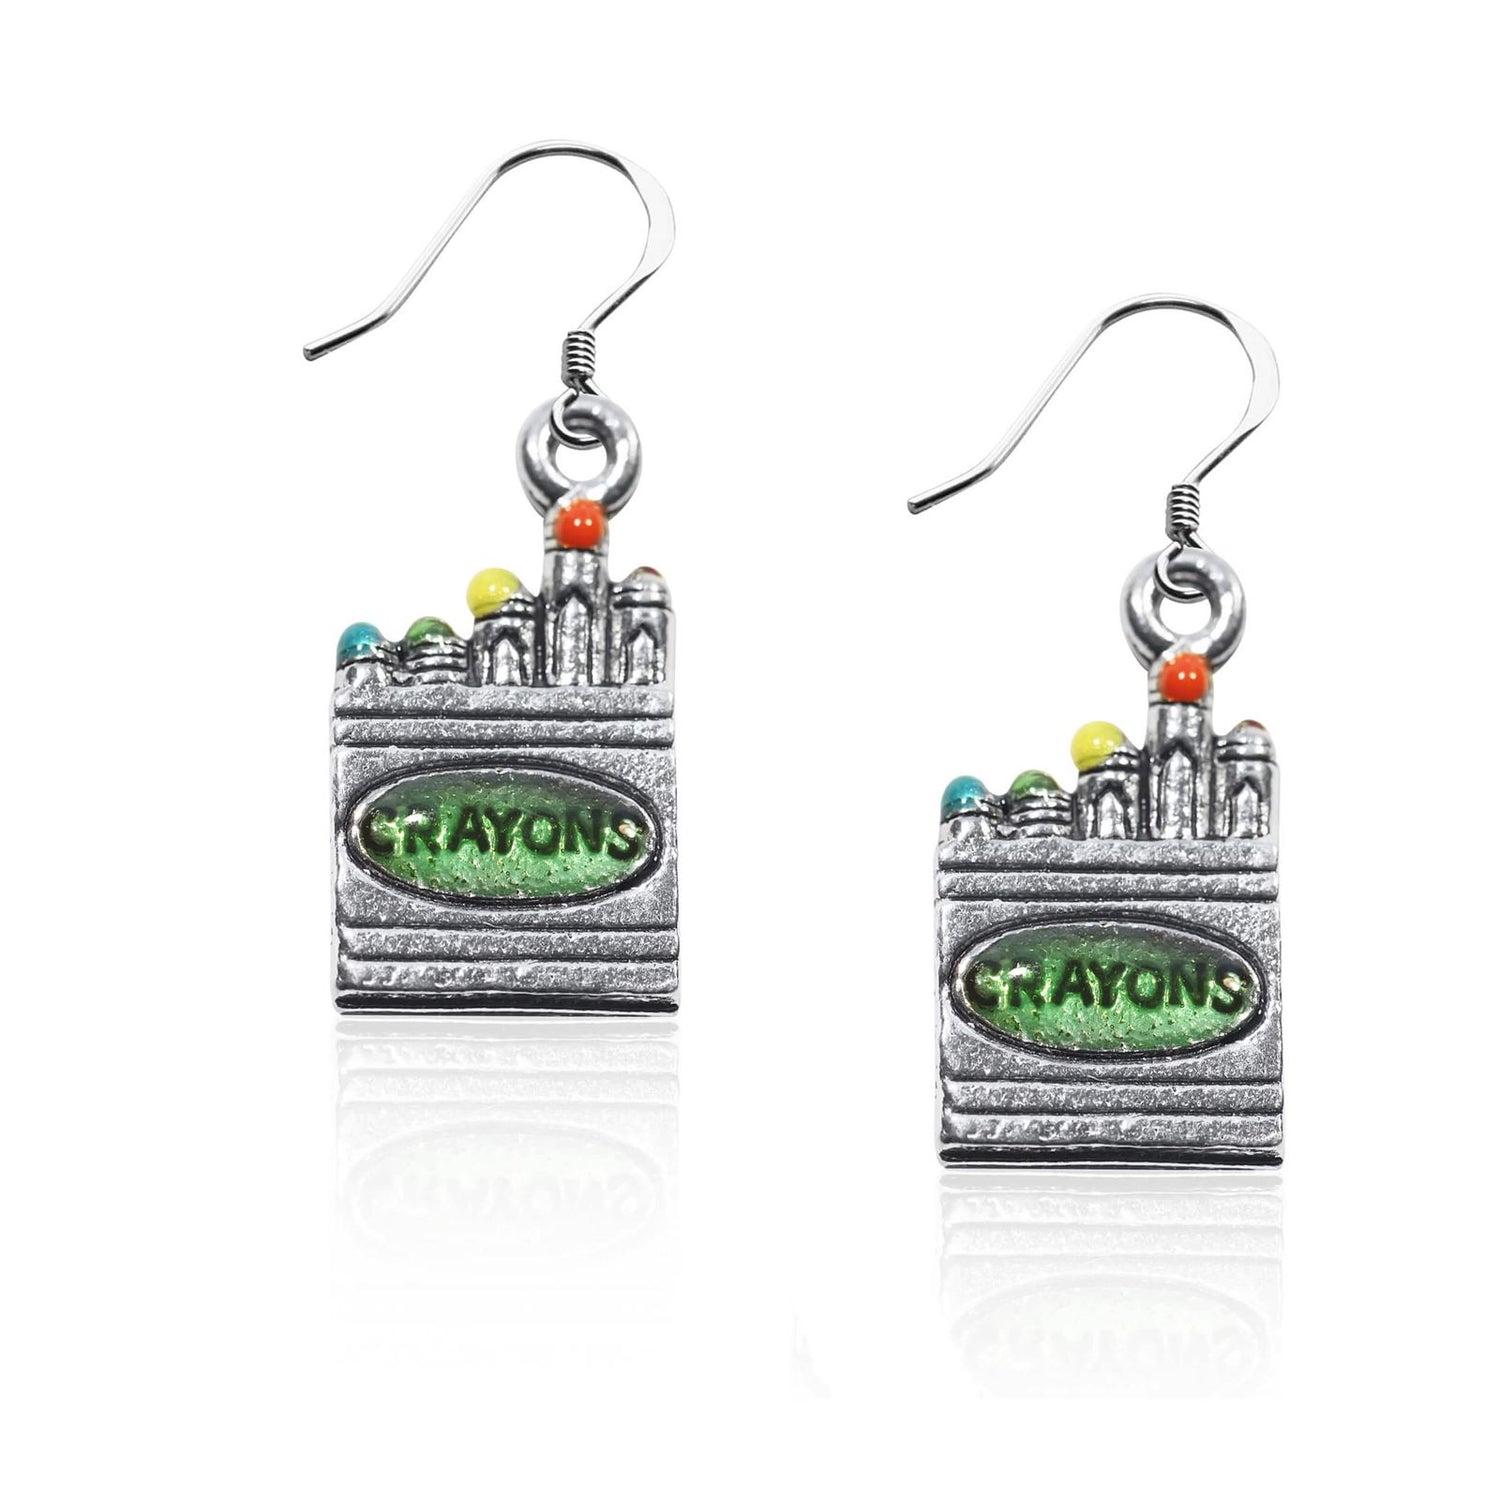 Whimsical Gifts | Crayons Charm Earrings in Silver Finish | Professions Themed | Teacher | Jewelry